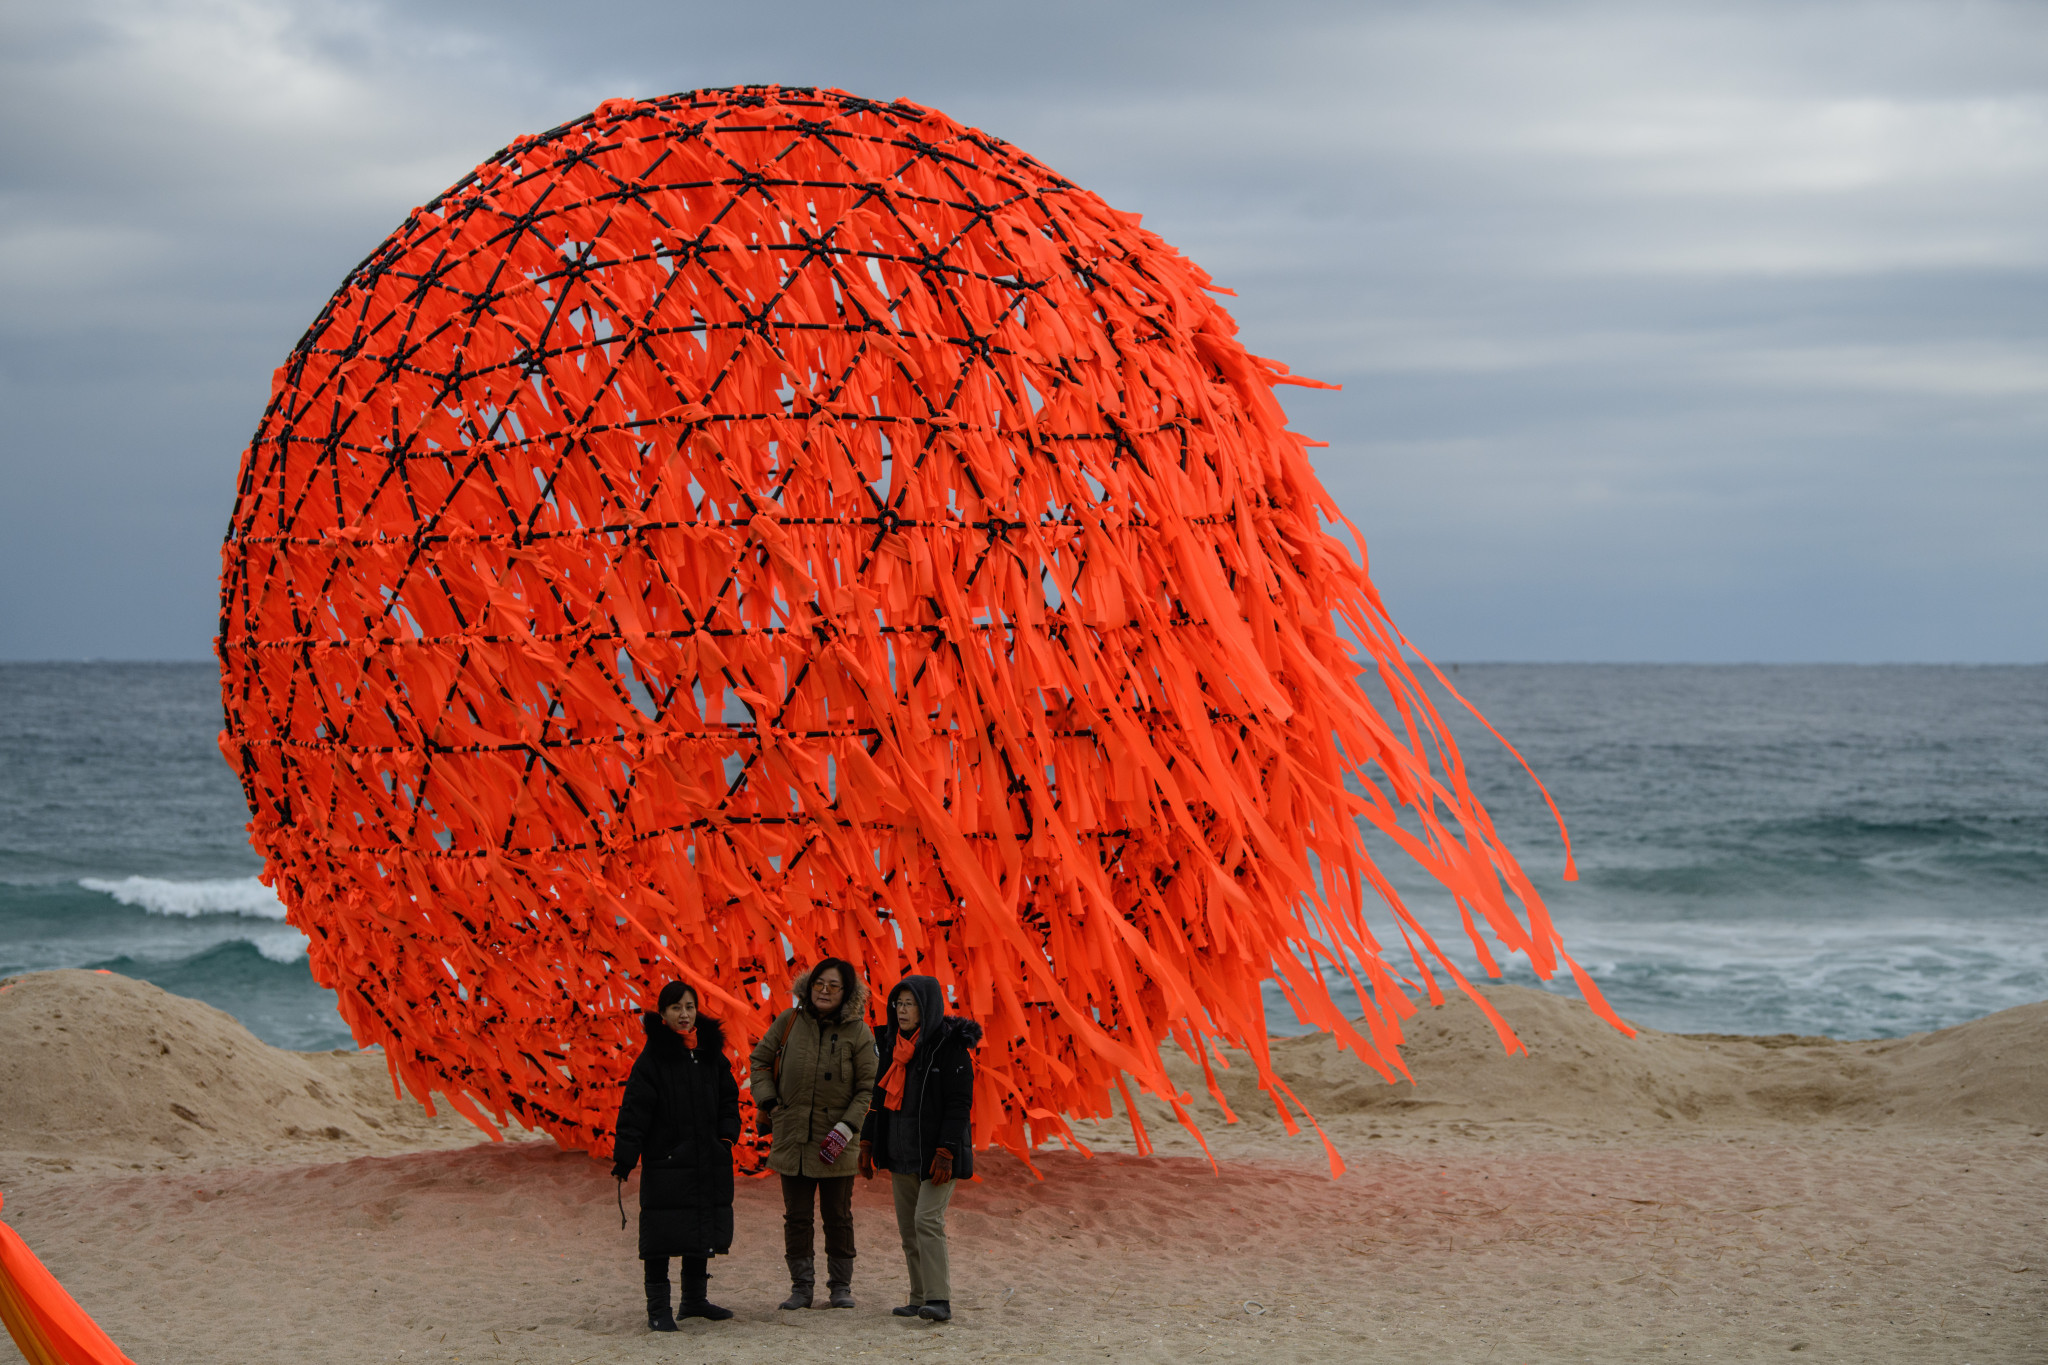 Women stand next to a sculpture on the beach ©Getty Images